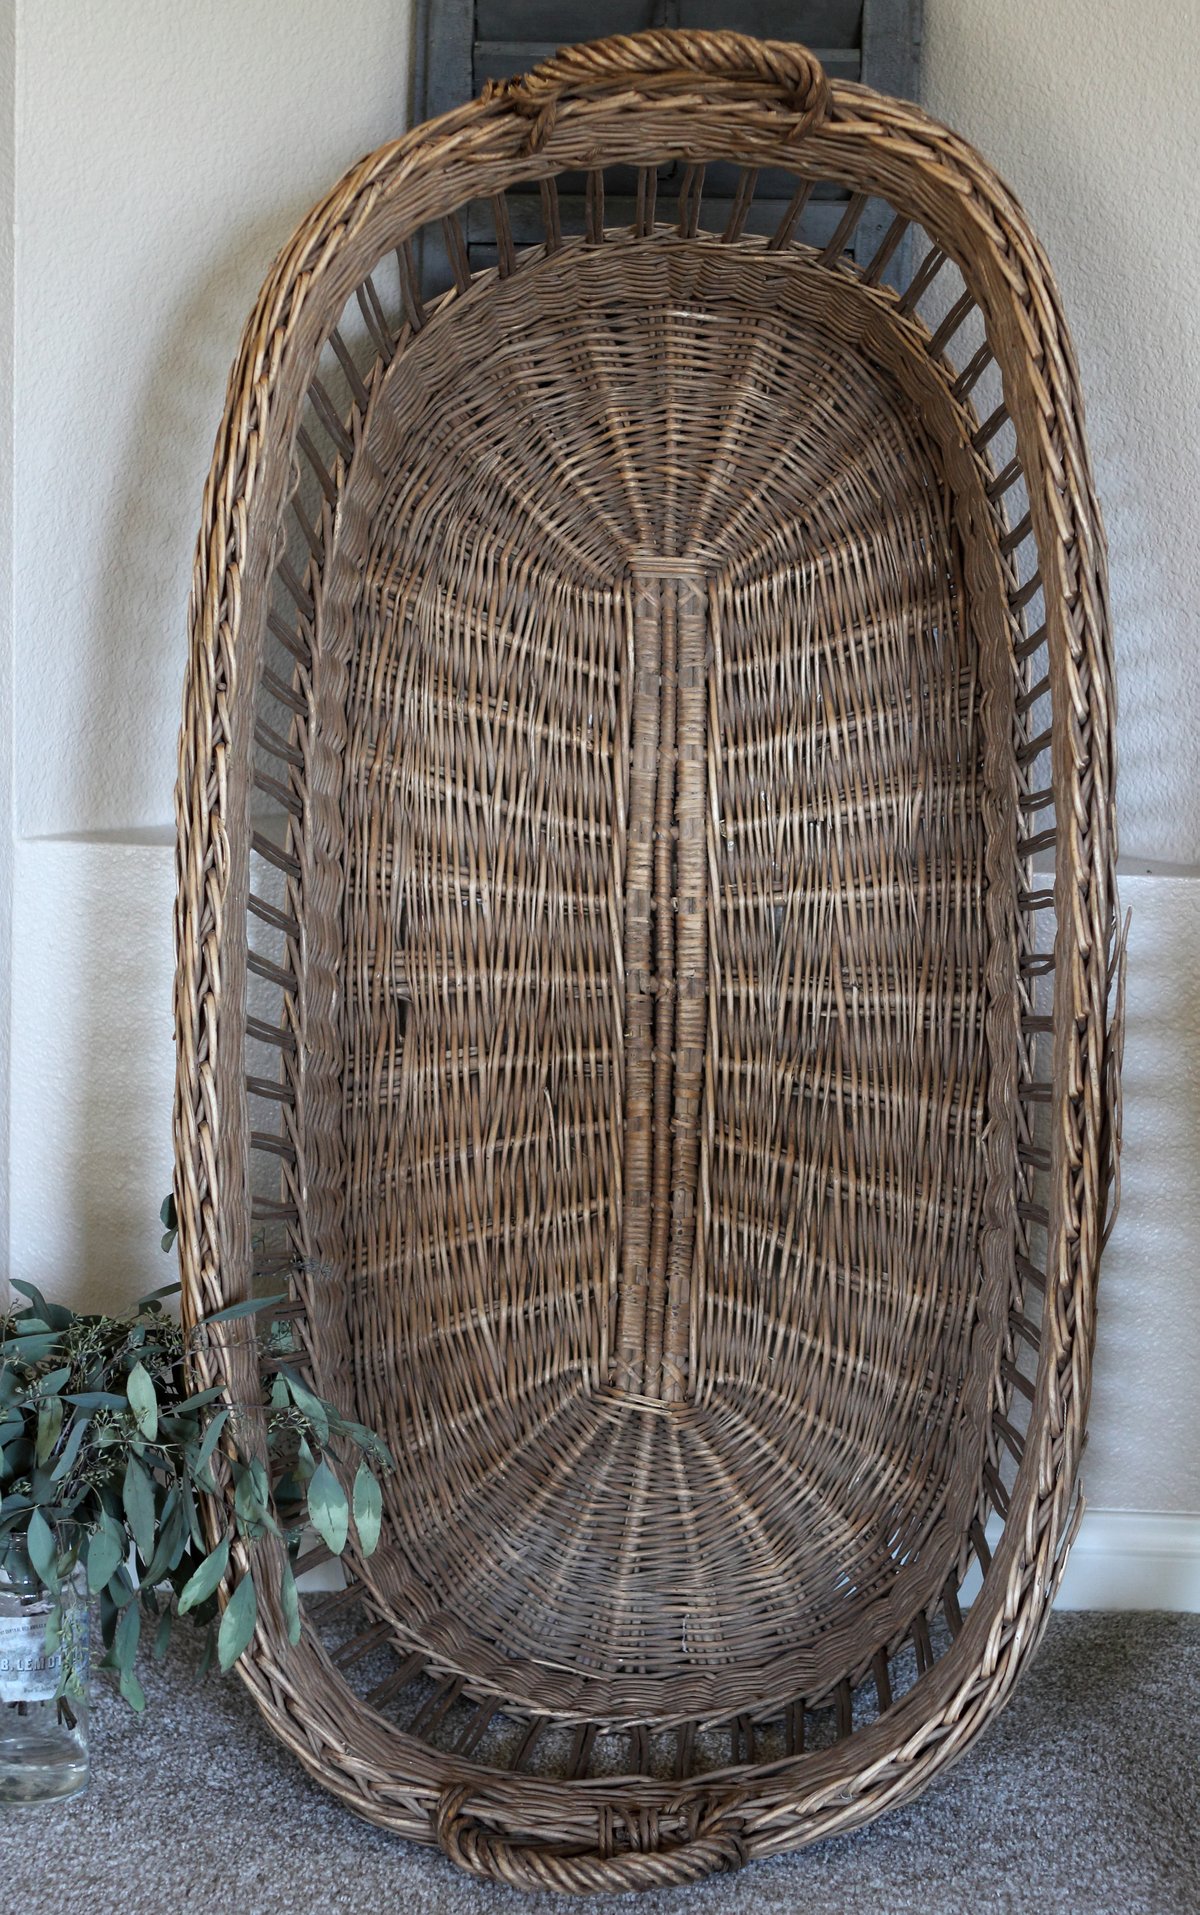 Image of Large Vintage Rustic Basket (Local Pick-up Only)